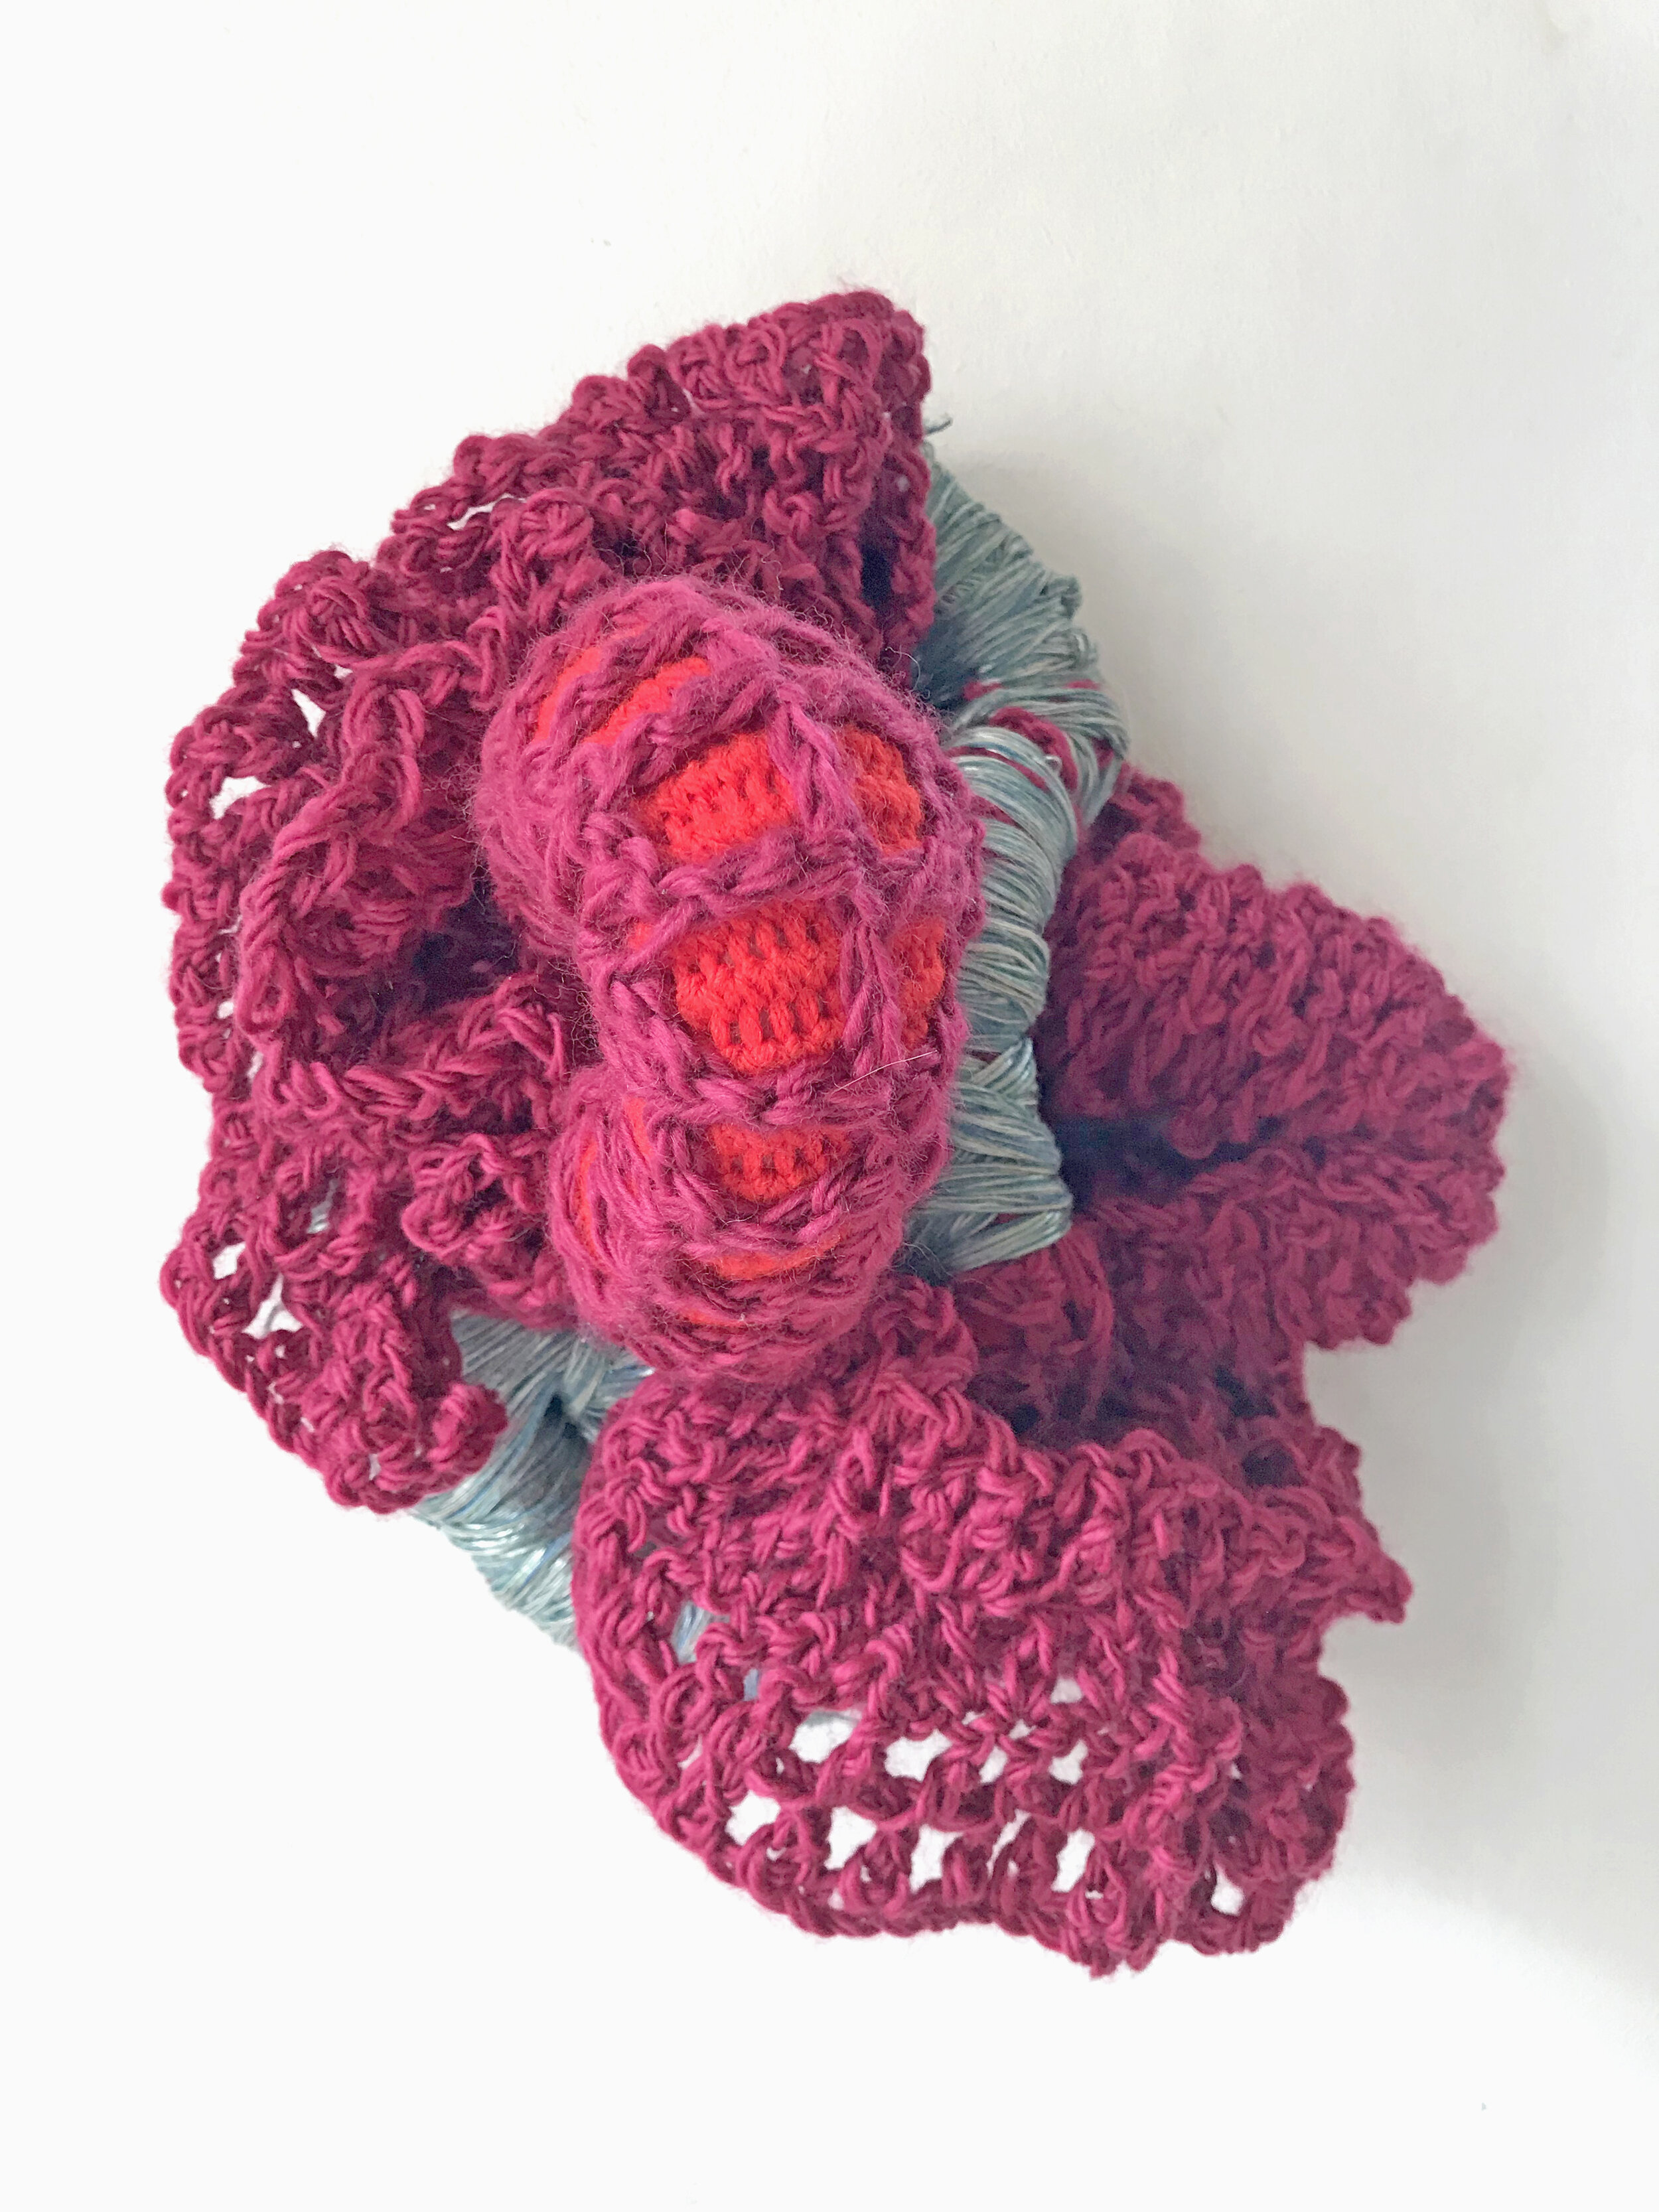 Knitted sculpture